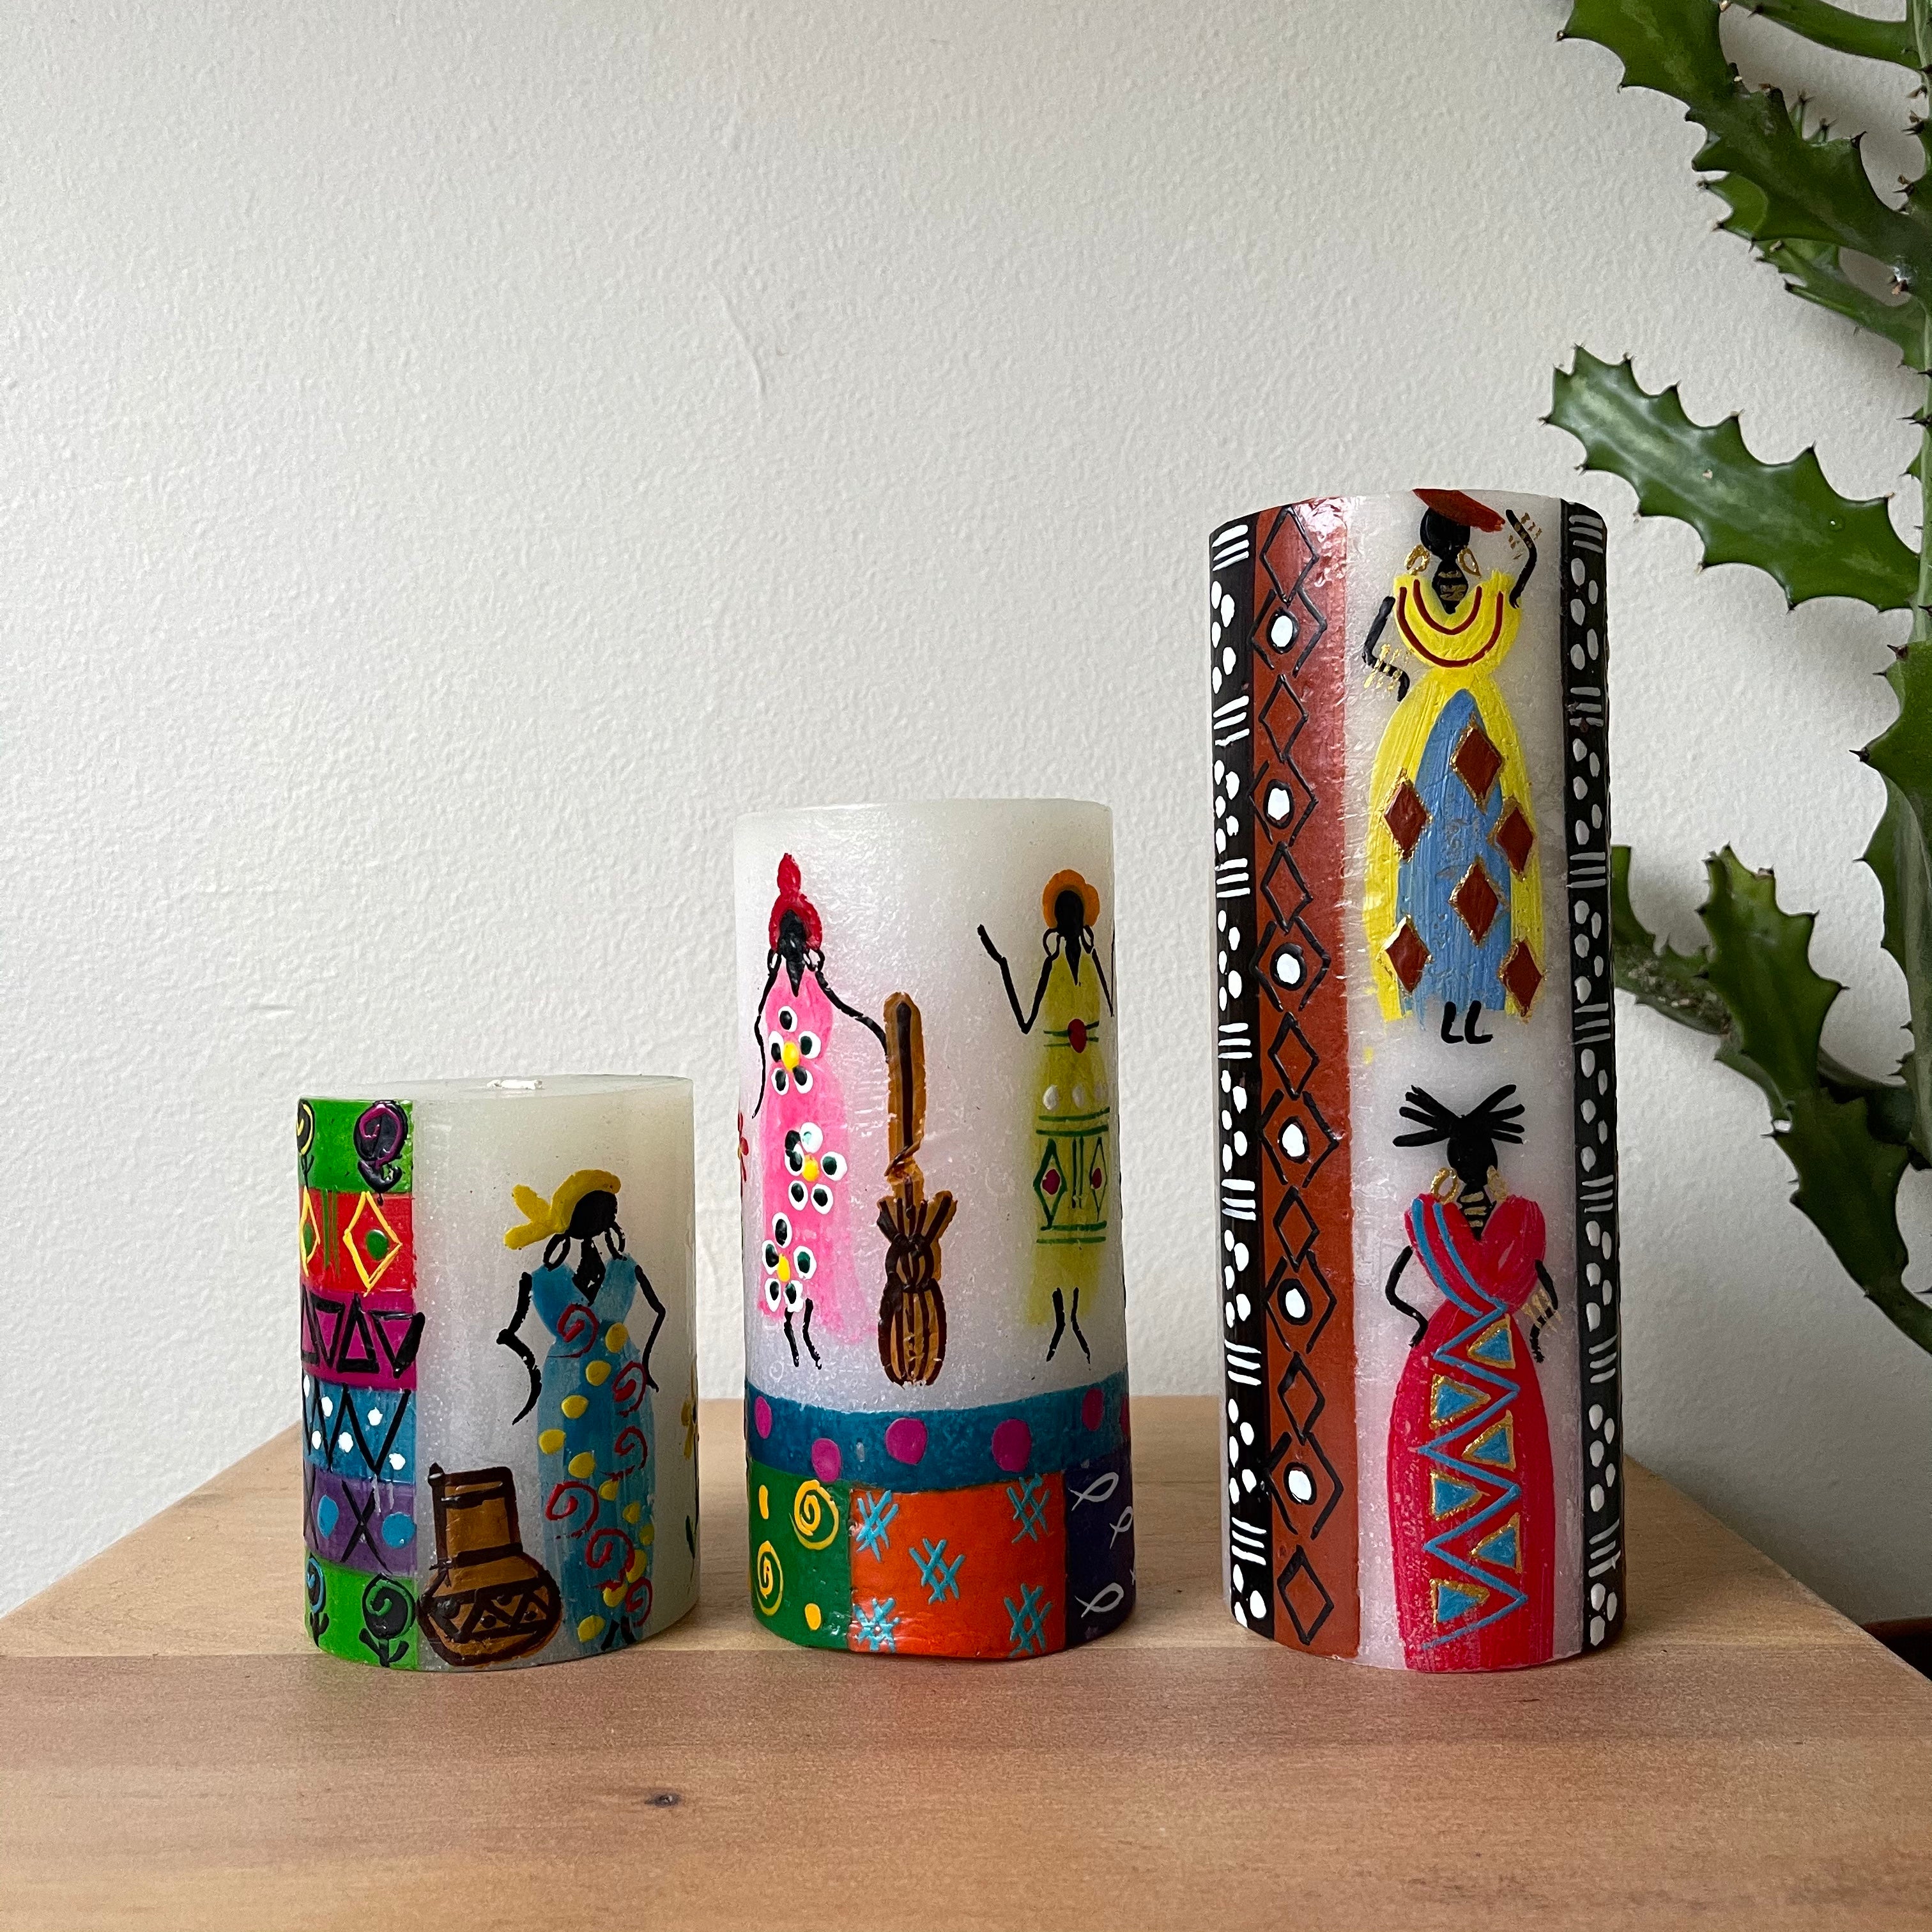 Three African Ladies pillars; 3x4, 3x6, 3x8.  Each with colorful design and whimsy African Lady painted on the side. Fair Trade